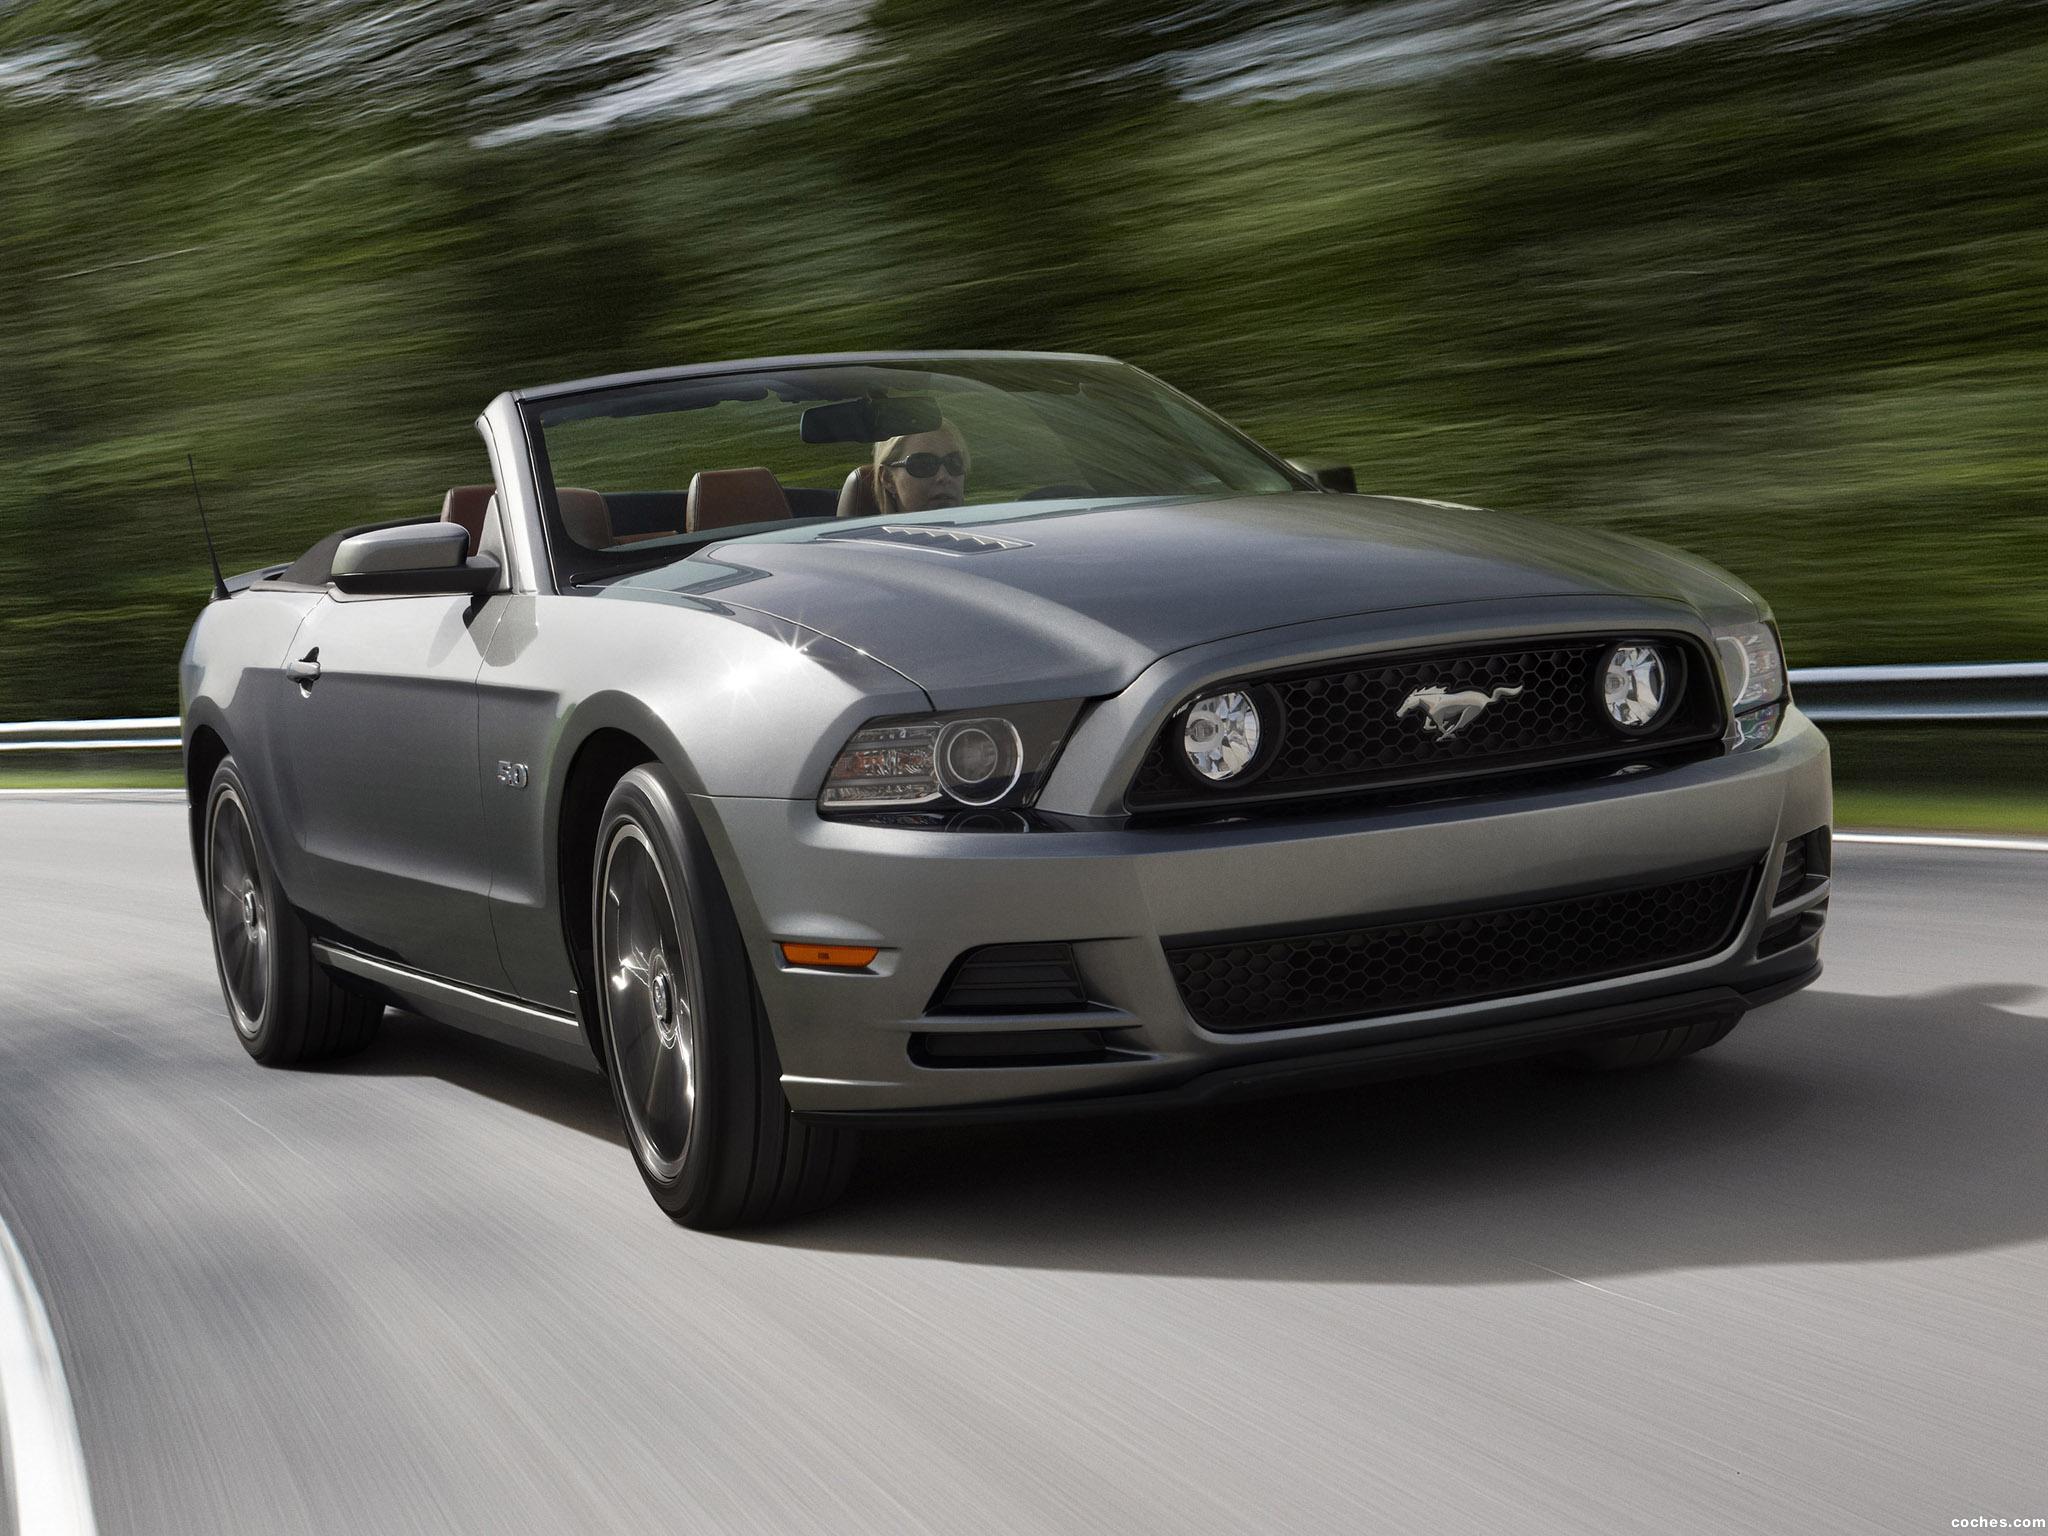 ford_mustang-5-0-gt-convertible-2012_r4.jpg